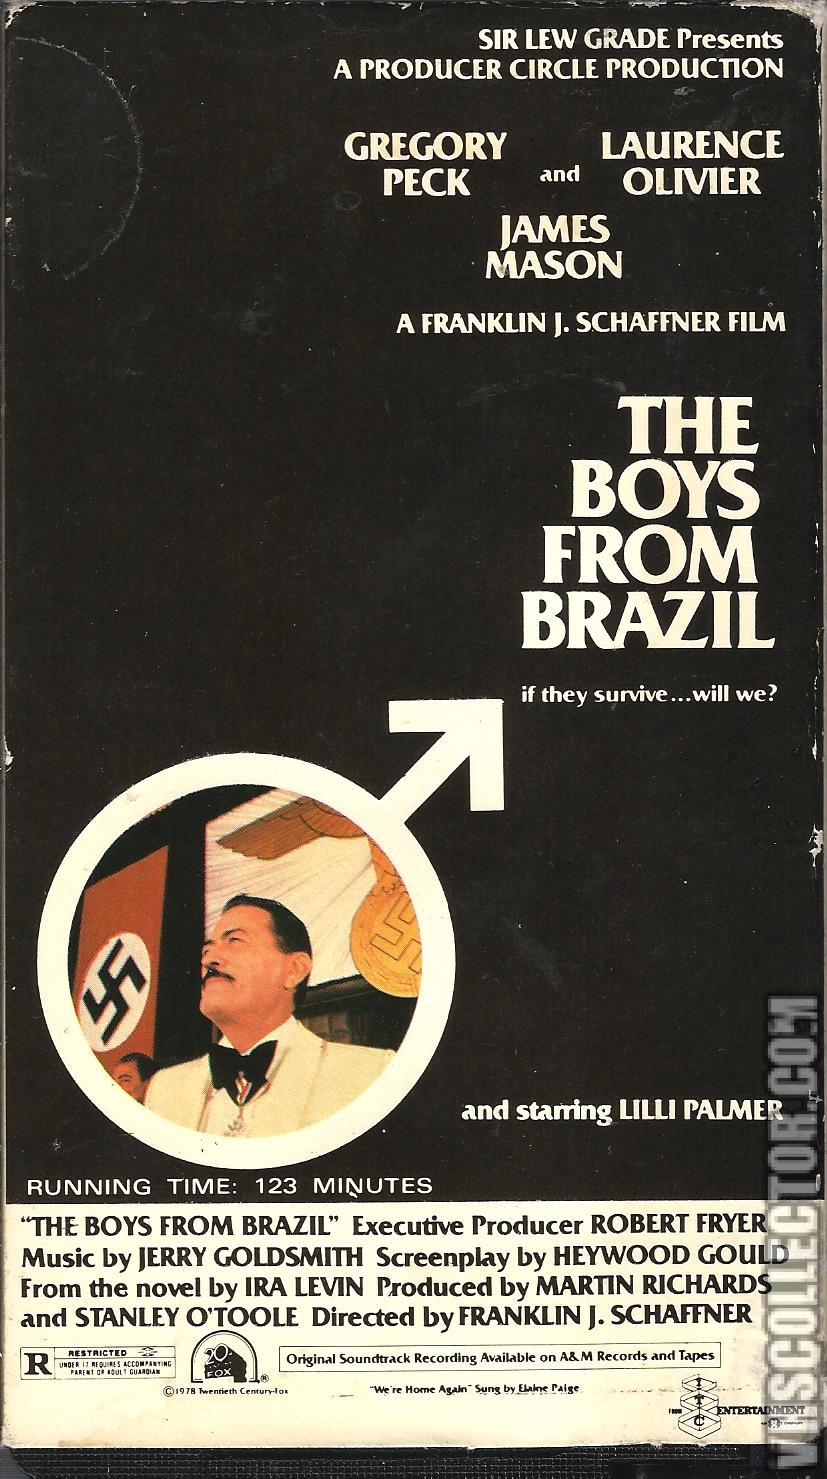 The 1970 Boys from Brazil